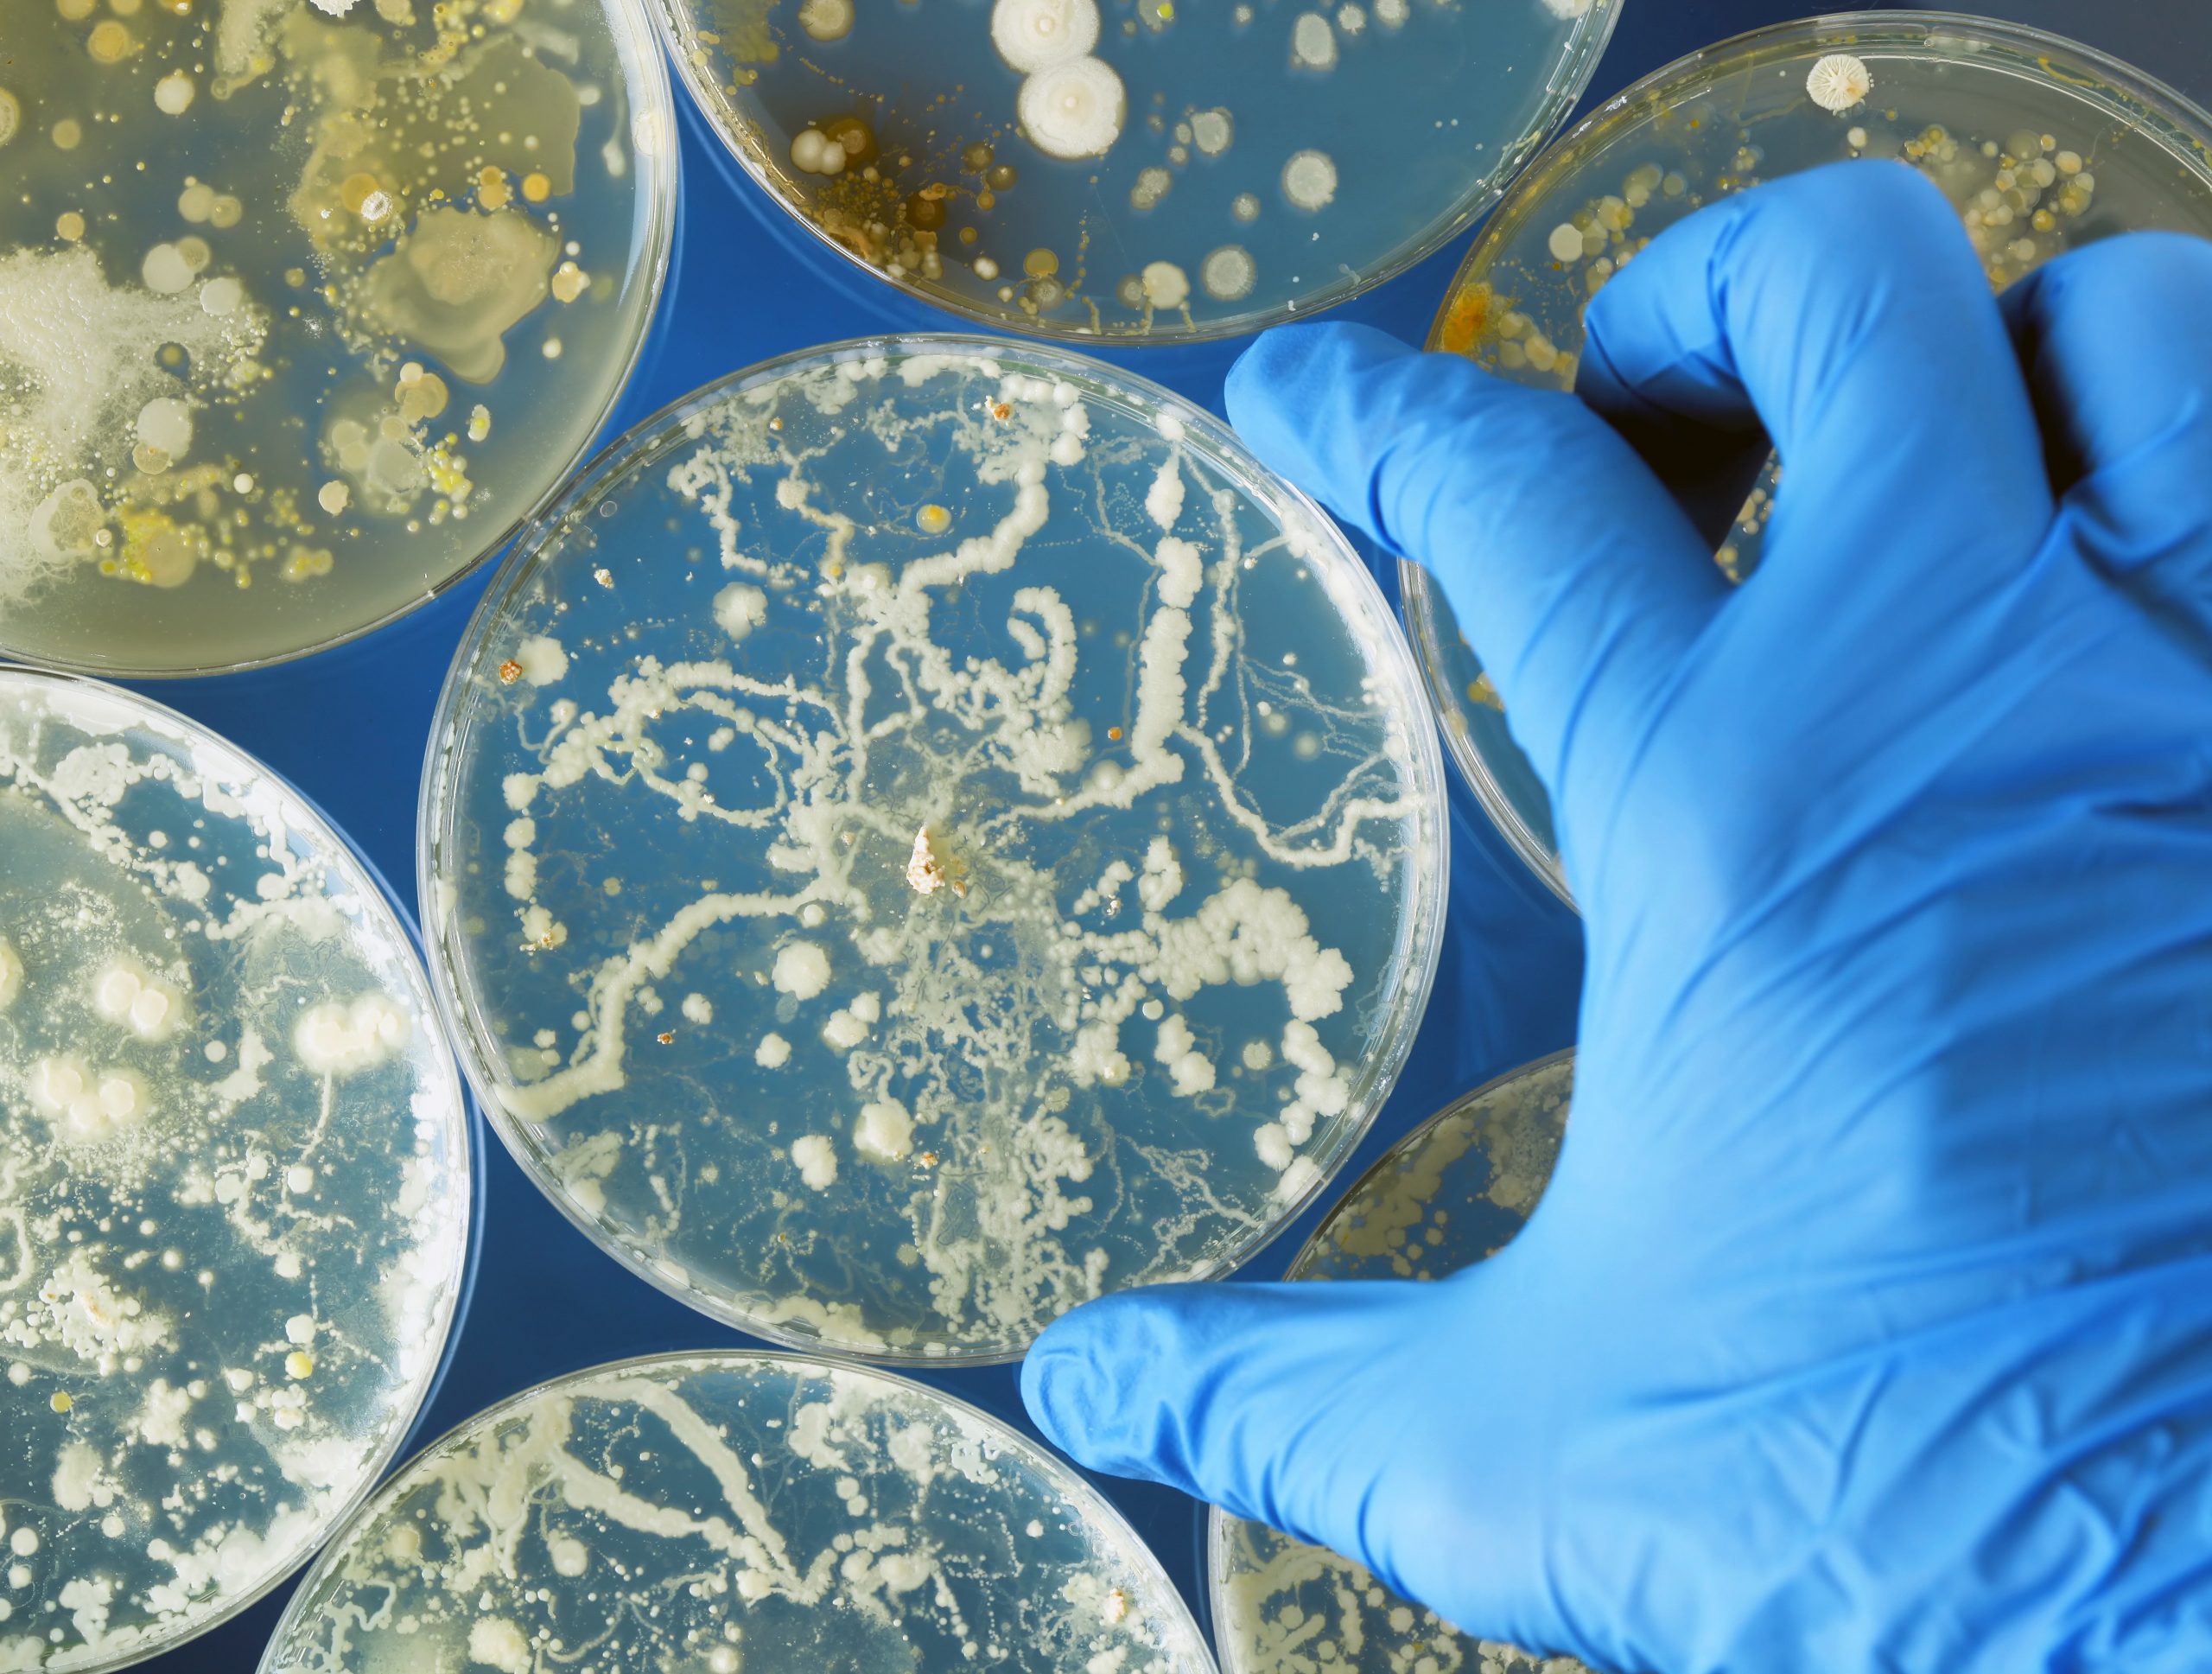 Cases Of Dangerous Drug Resistant Fungal Infections Are Spreading